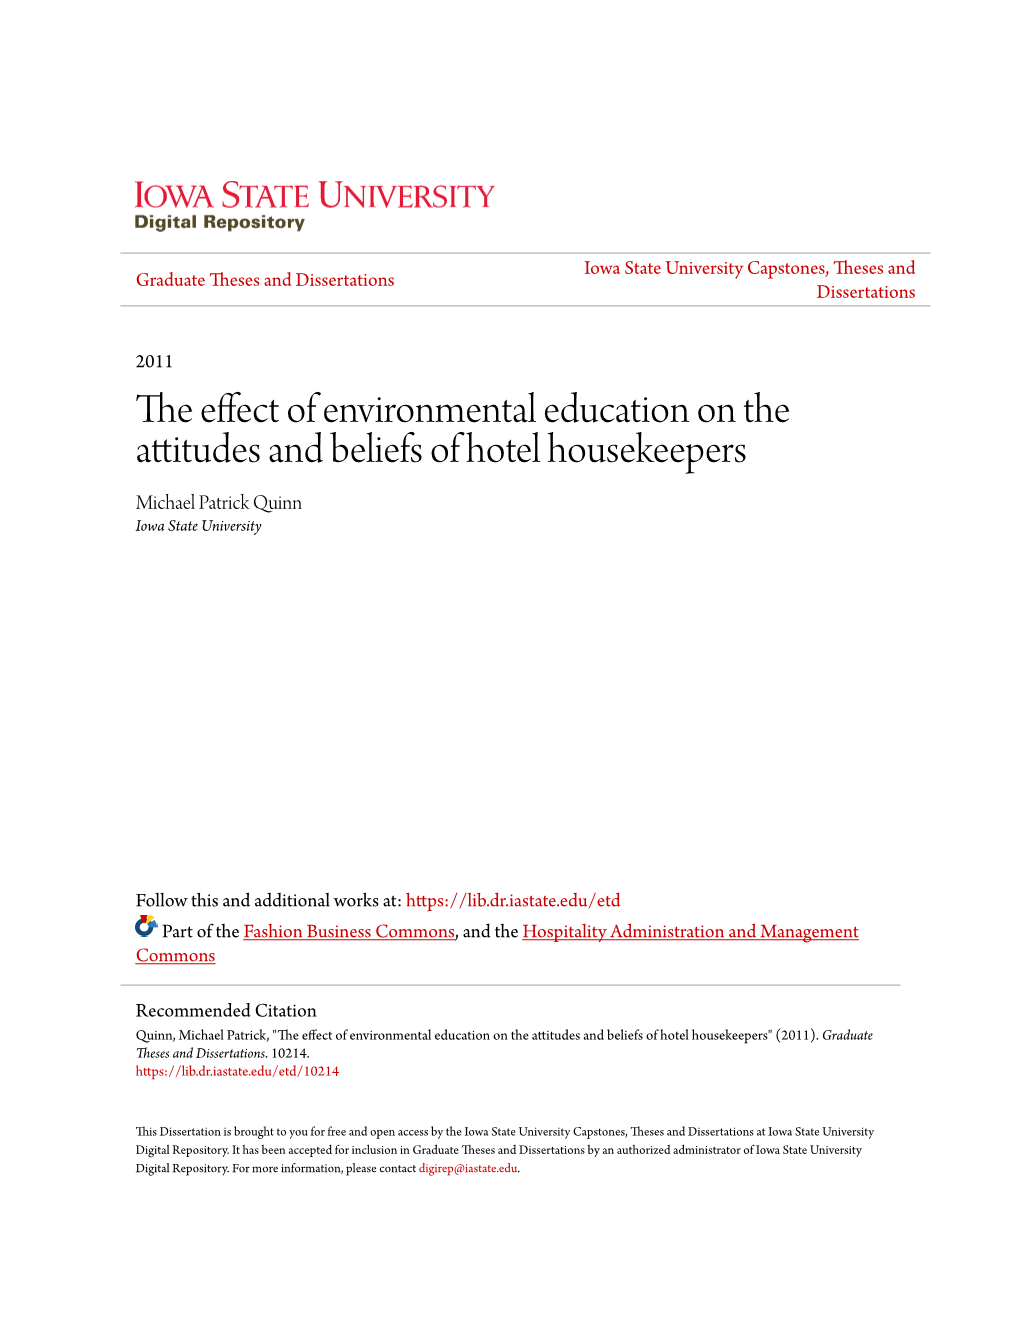 The Effect of Environmental Education on the Attitudes and Beliefs of Hotel Housekeepers Michael Patrick Quinn Iowa State University